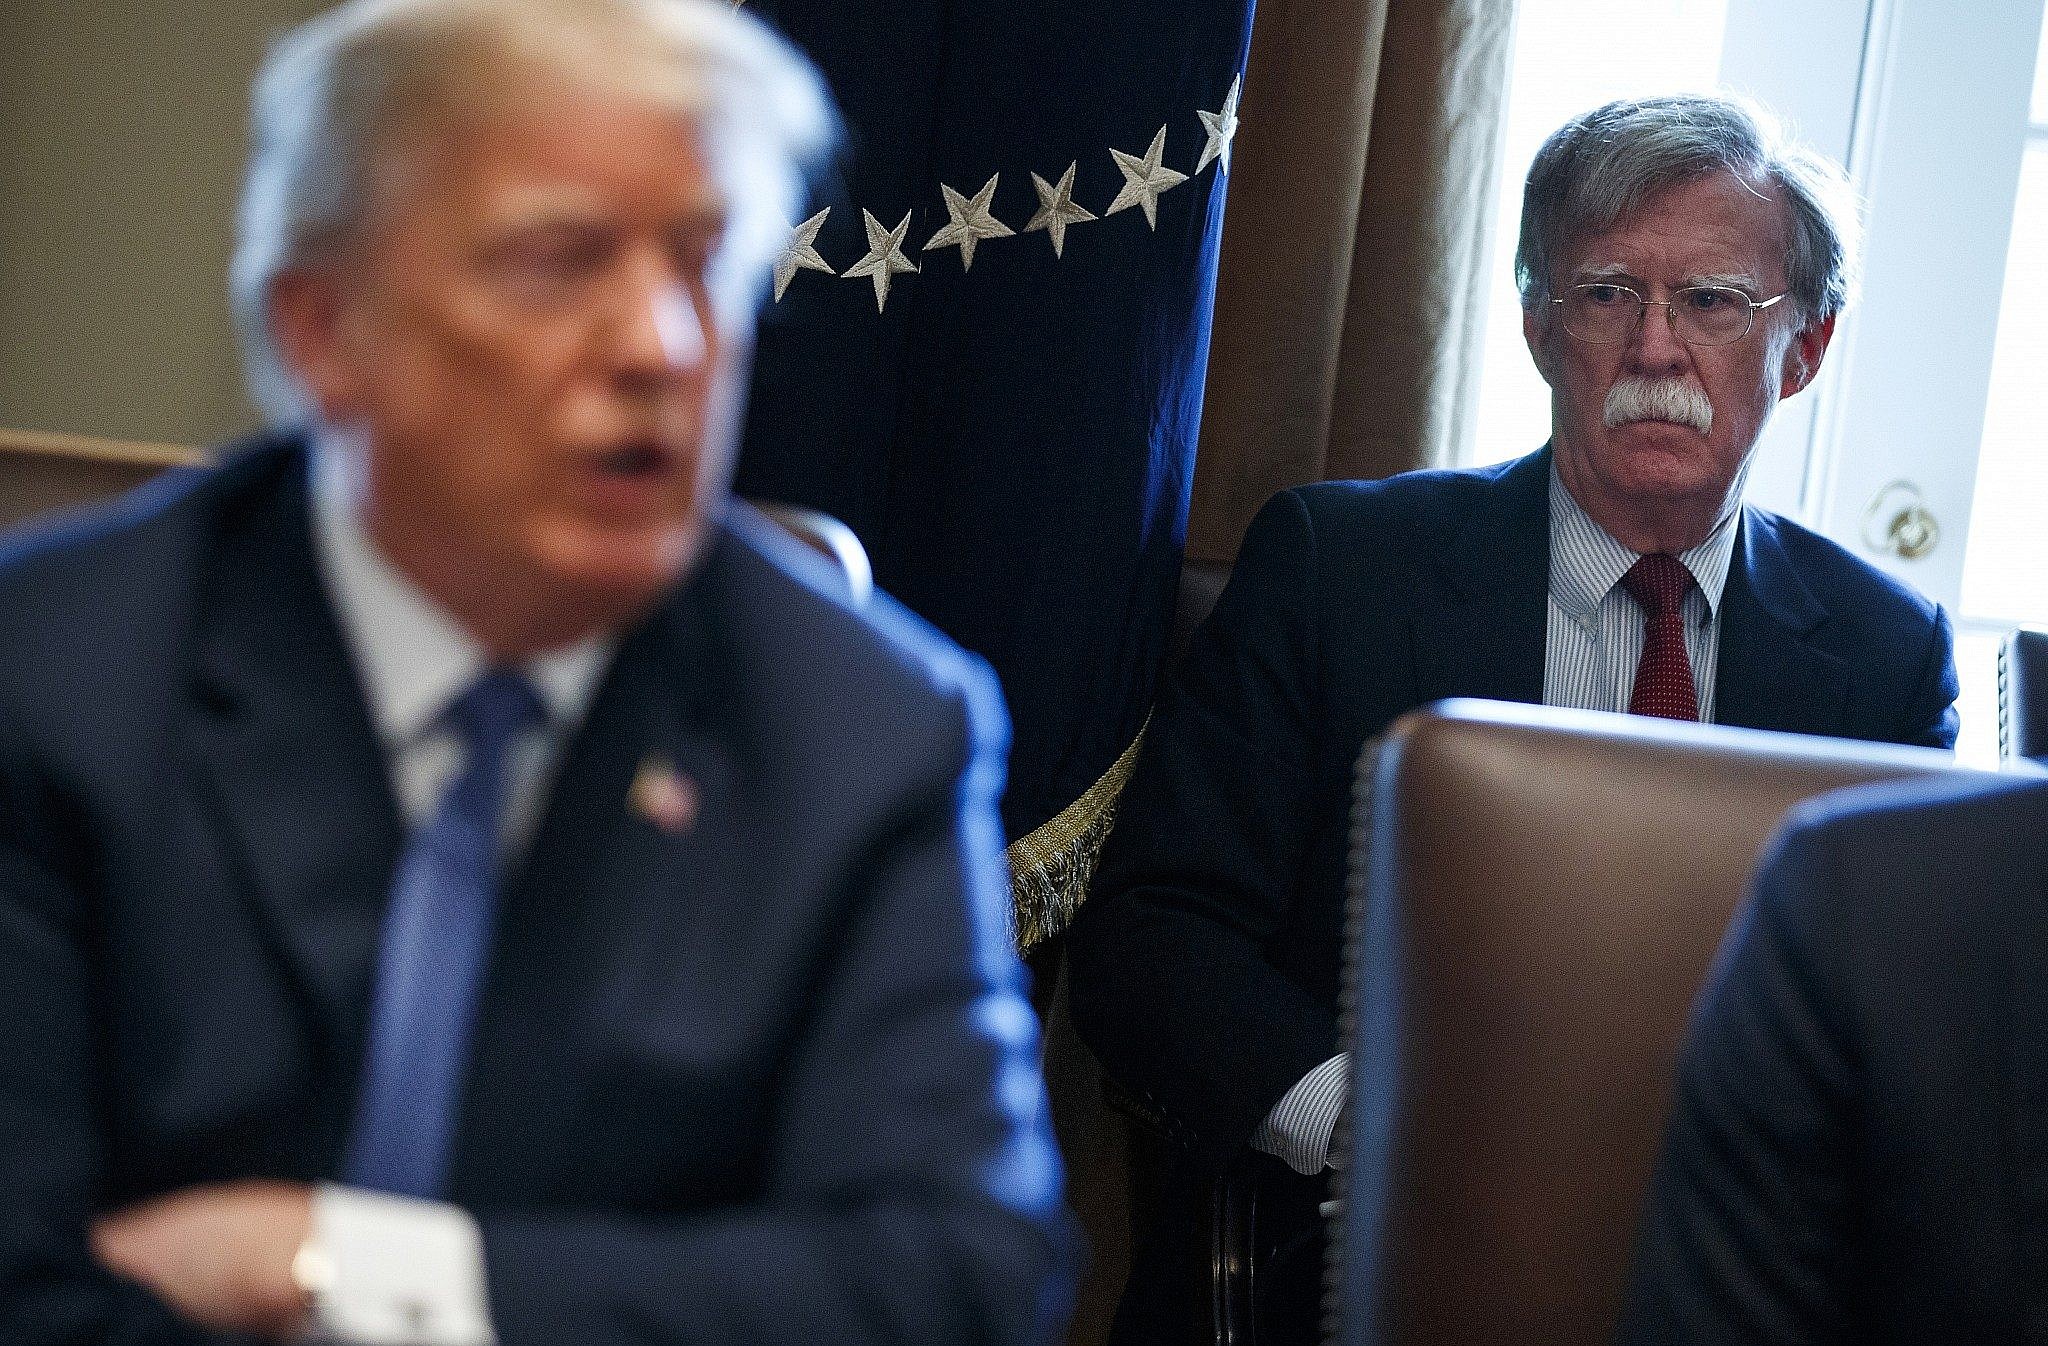 Bolton takes the helm on national security at time of tumult | The Times of Israel